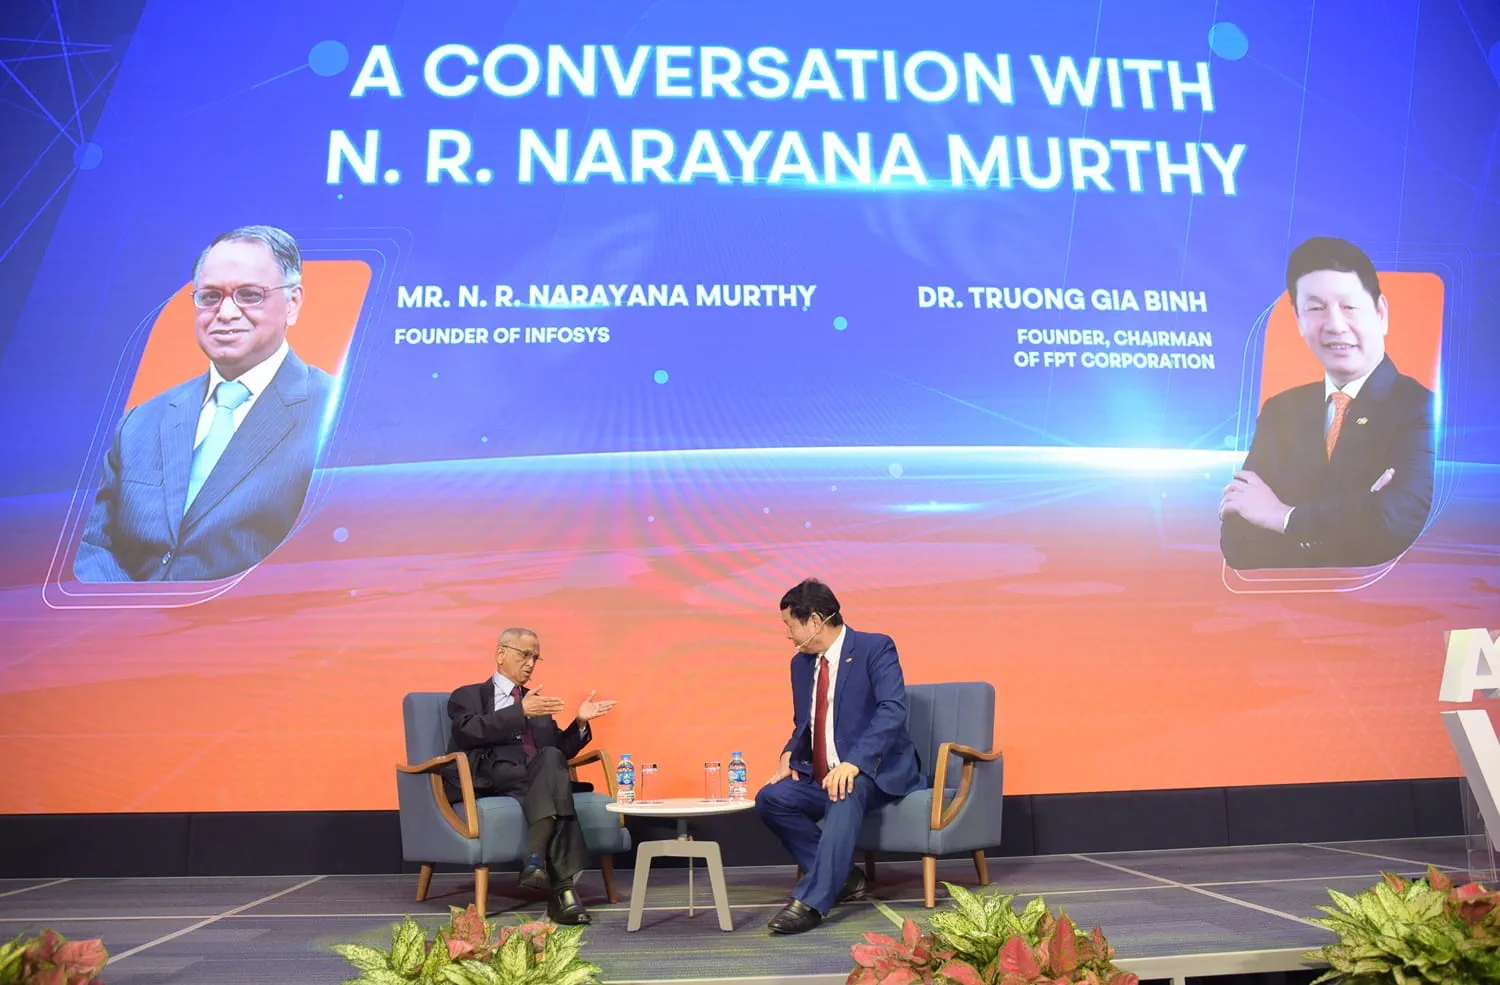 Mr. Truong Gia Binh, Chairman of FPT, led the discussion session between Infosys Founder Narayana Murthy and the Vietnamese IT community on the afternoon of May 20.